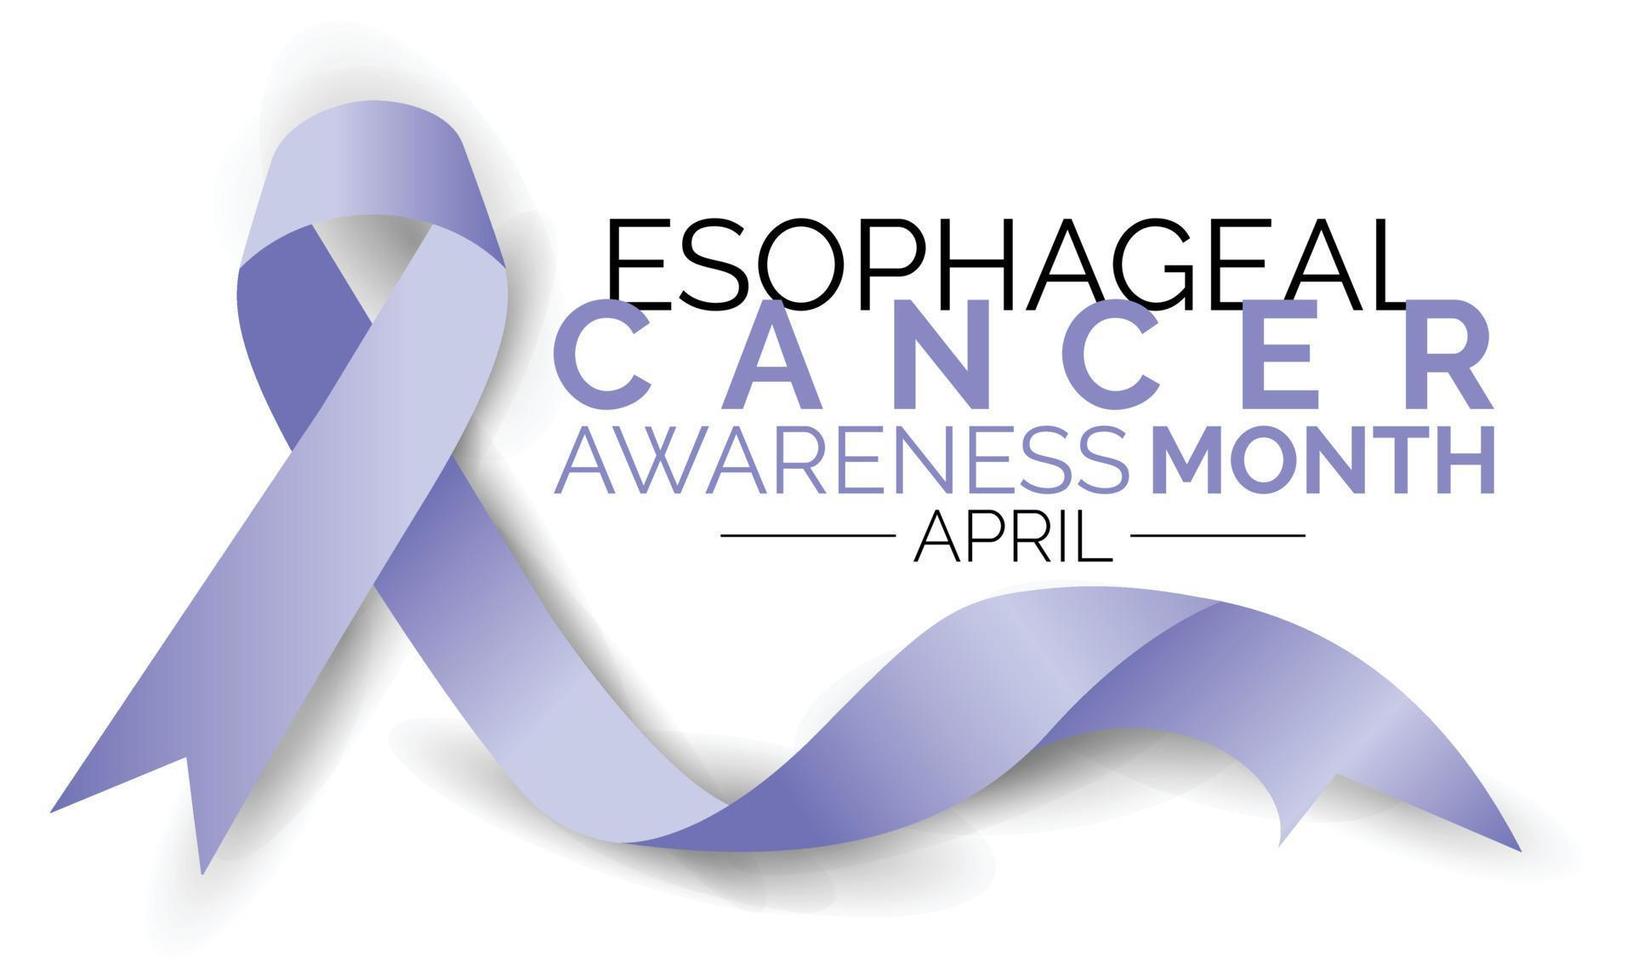 Esophageal Cancer Awareness Month with Calligraphy Poster design . Periwinkle Ribbon .April is Cancer Awareness Month. vector